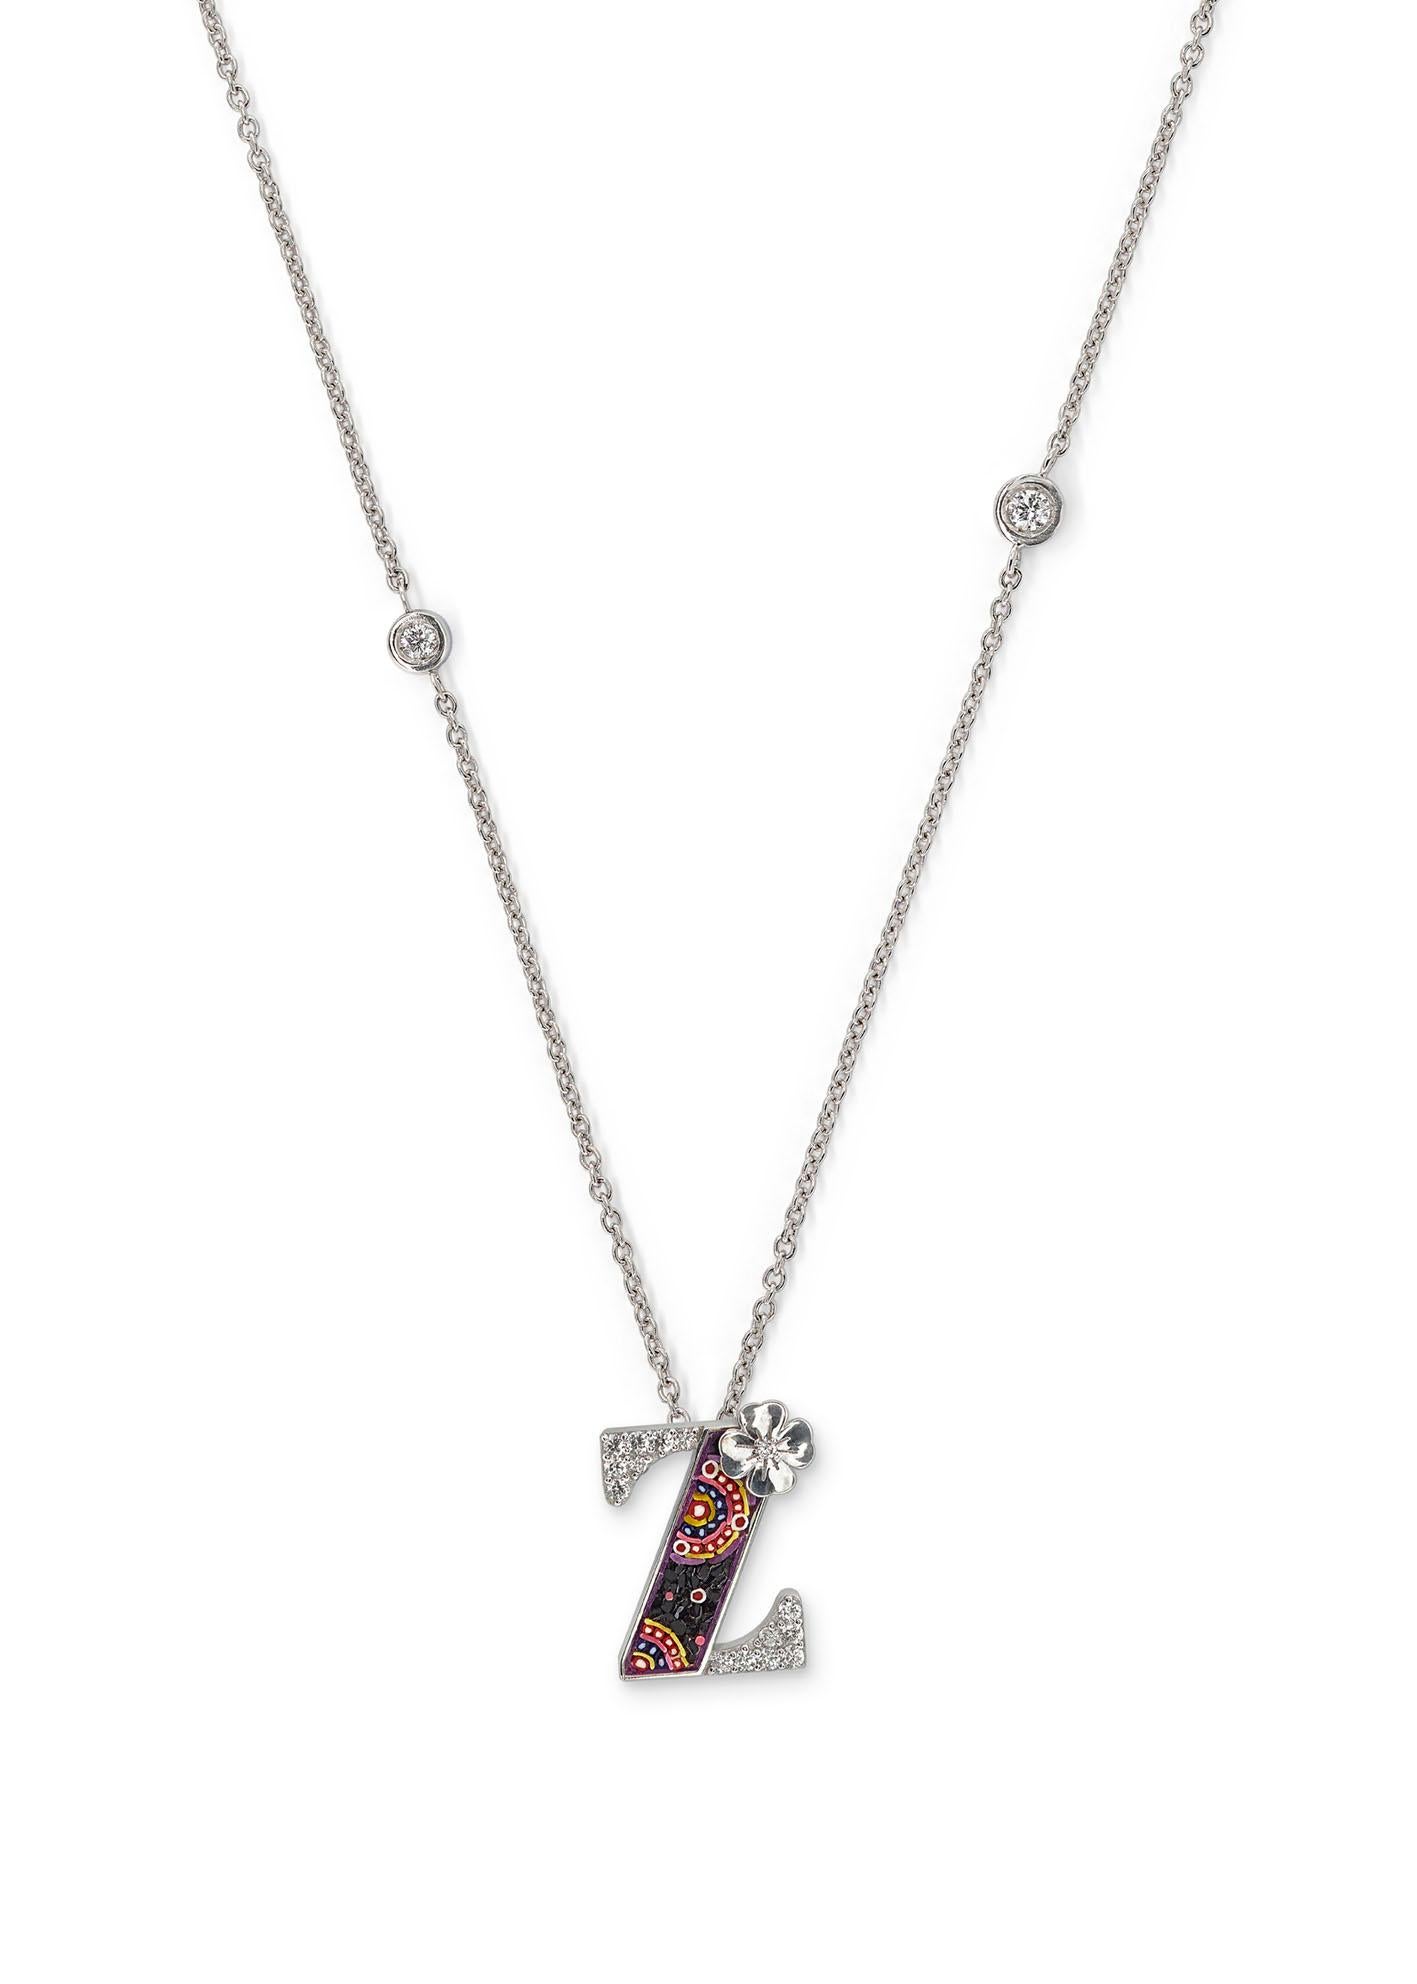 Brilliant Cut Necklace Letter Z White Gold White Diamonds Hand Decorated with Micromosaic For Sale